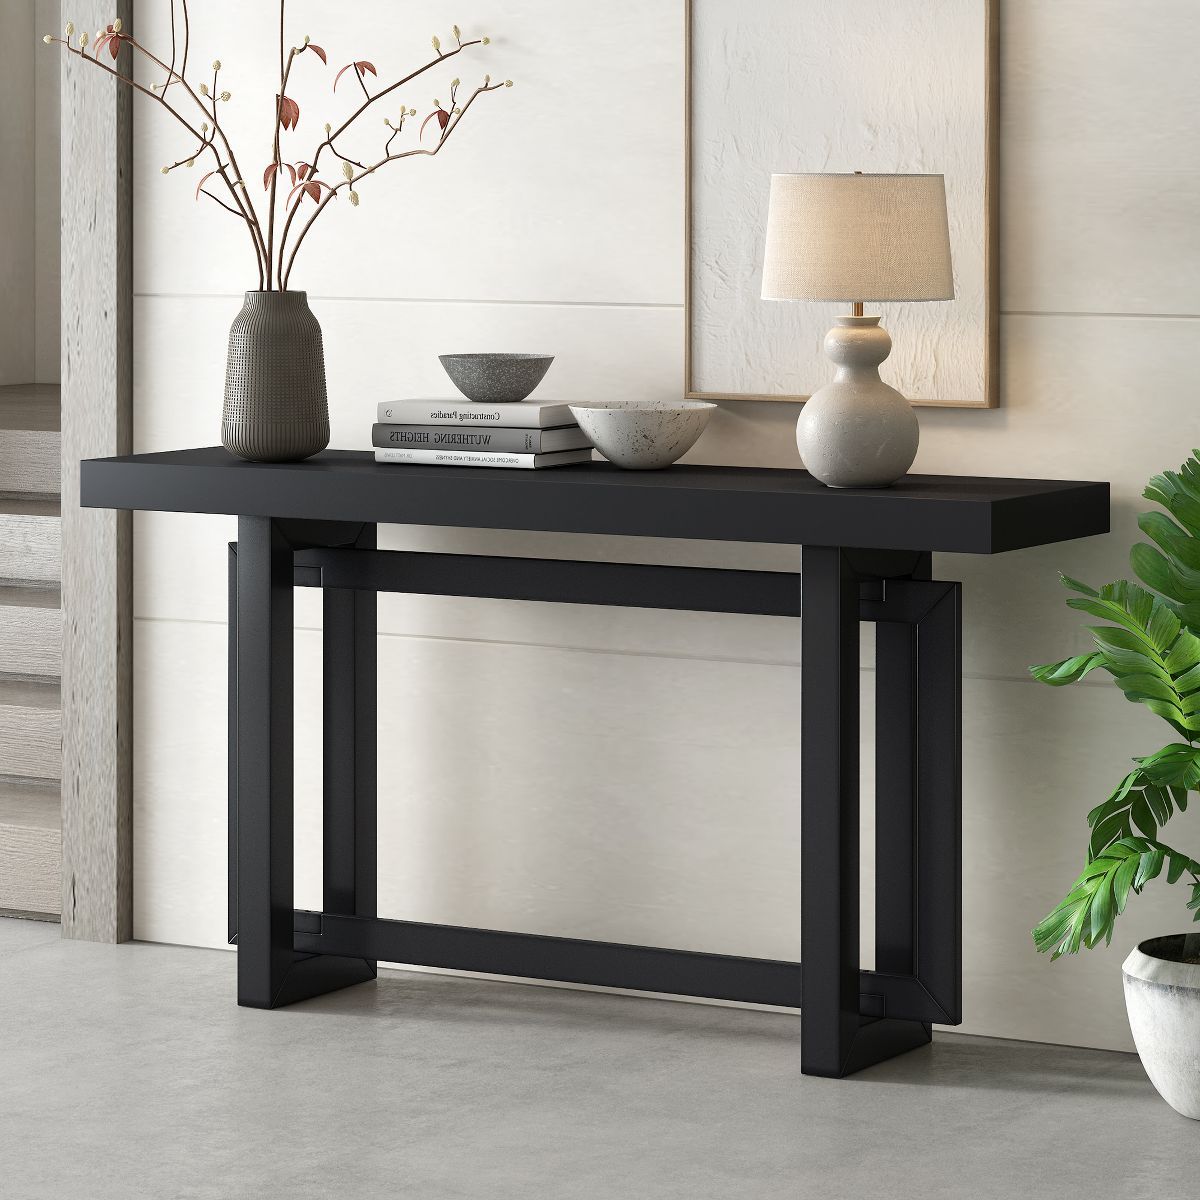 59.1" Modern Industrial Style Console Table - ModernLuxe | Target